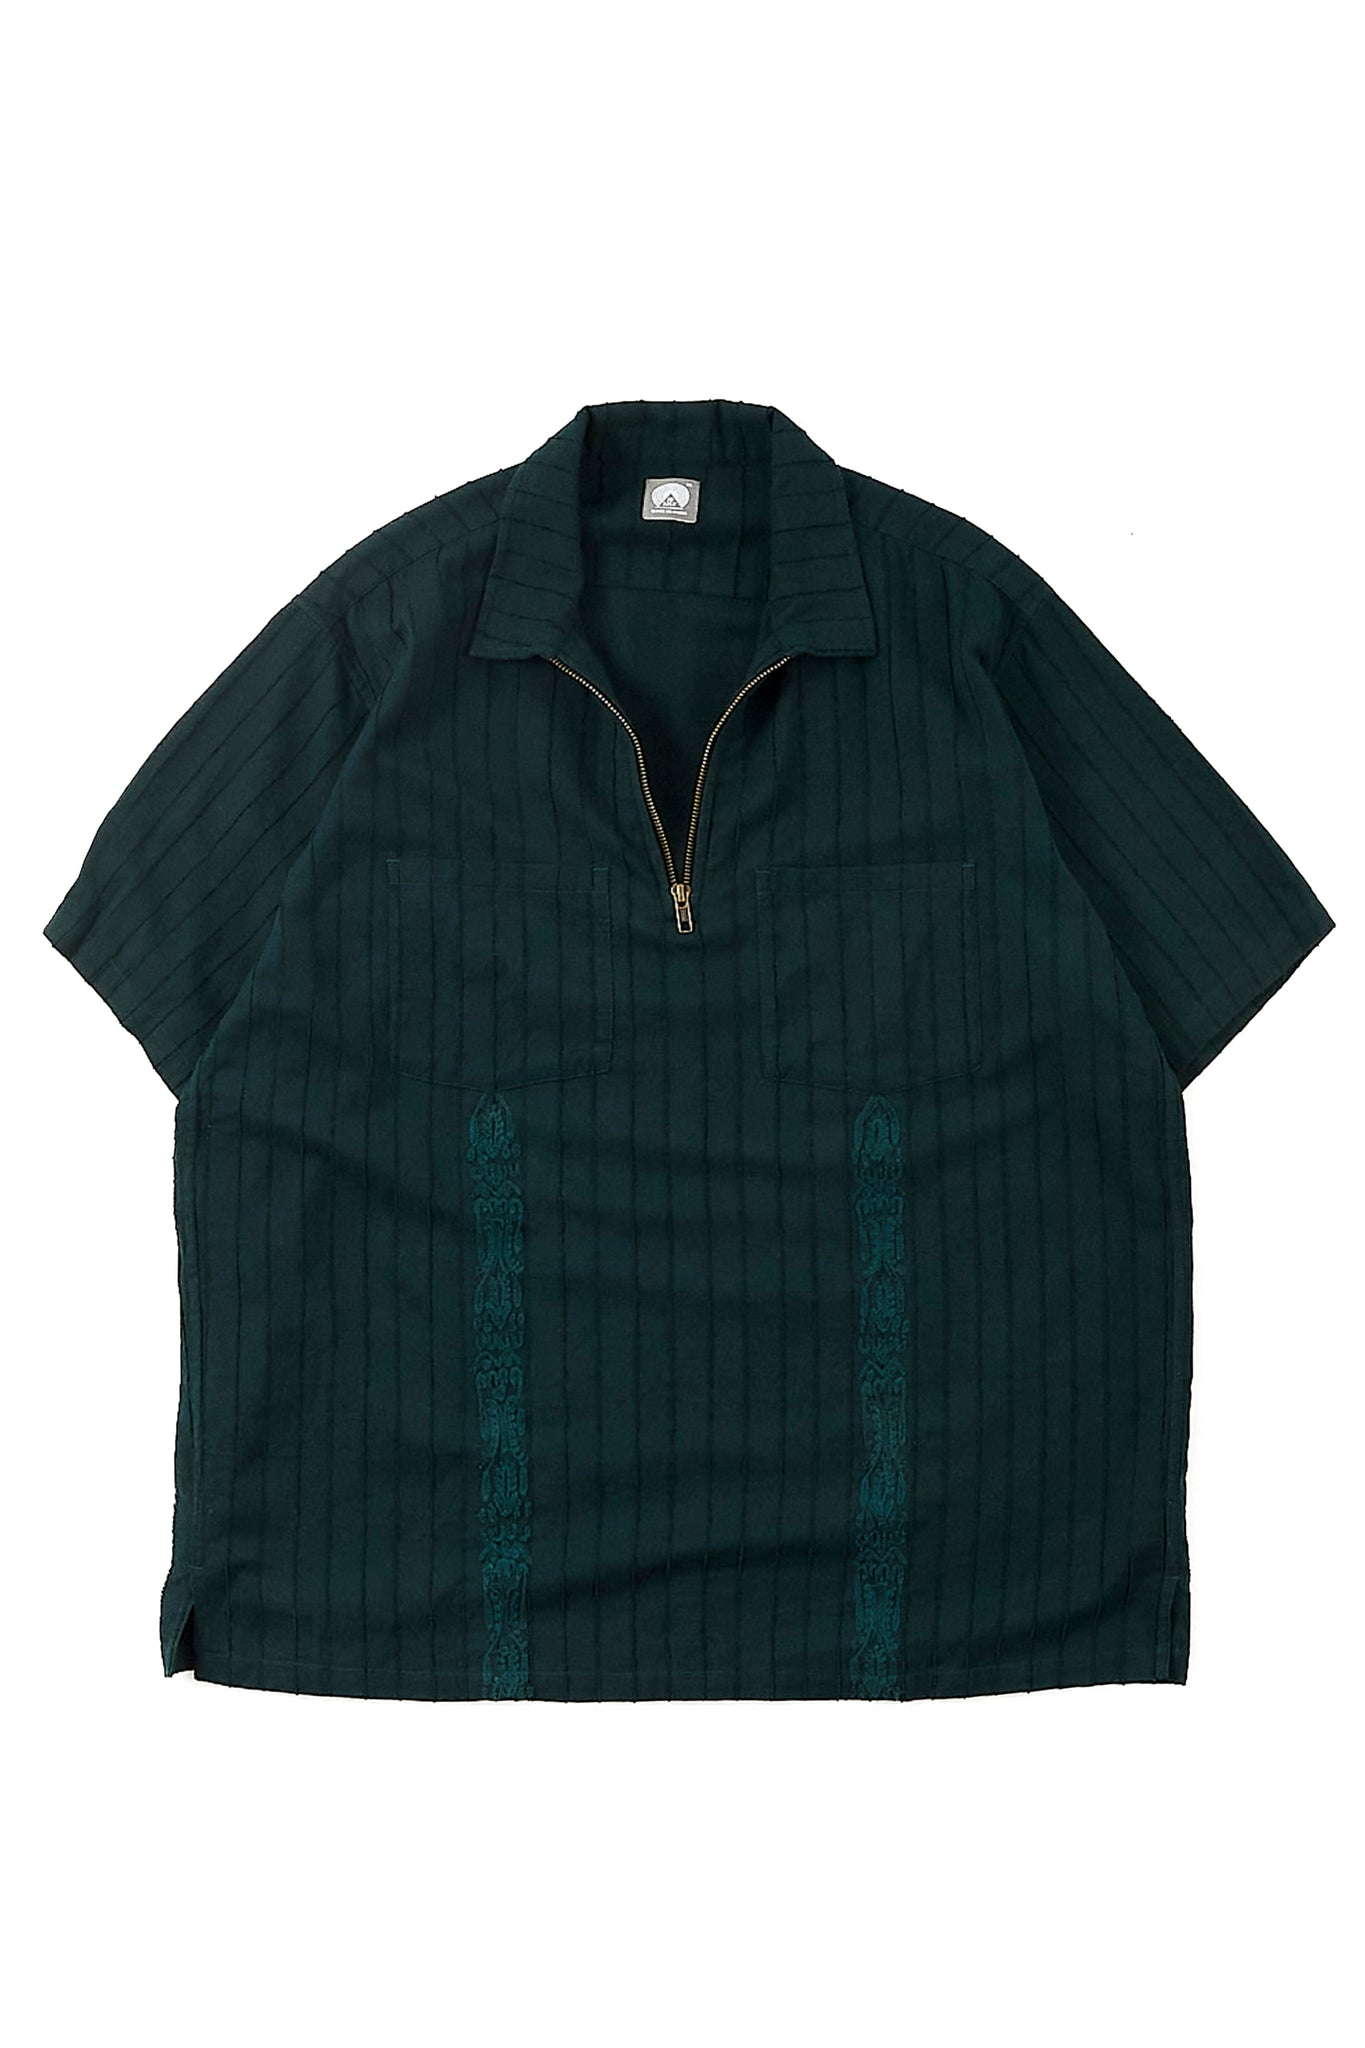 S/S HOLLOW PULLOVER SHIRT - BOTTLE GREEN TONAL JACQUARD STRIPED COTTON WITH FREEHAND CHAINSTITCH EMBROIDERY